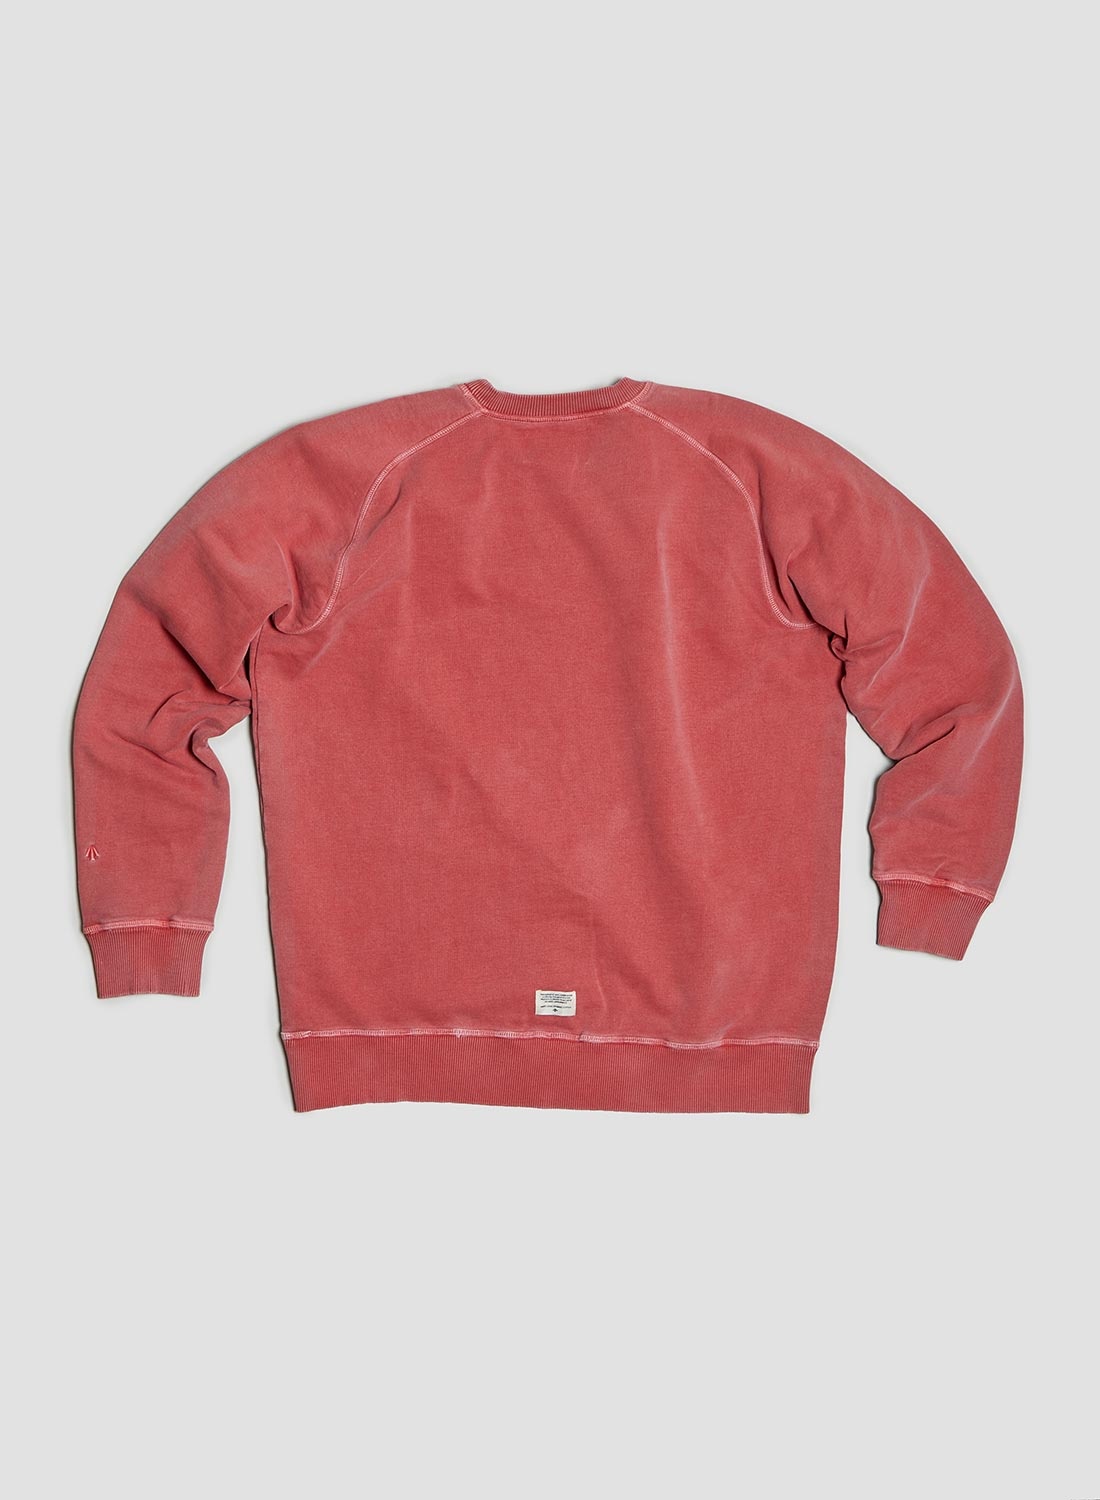 Embroidered Arrow Crew in Vintage Red - 2